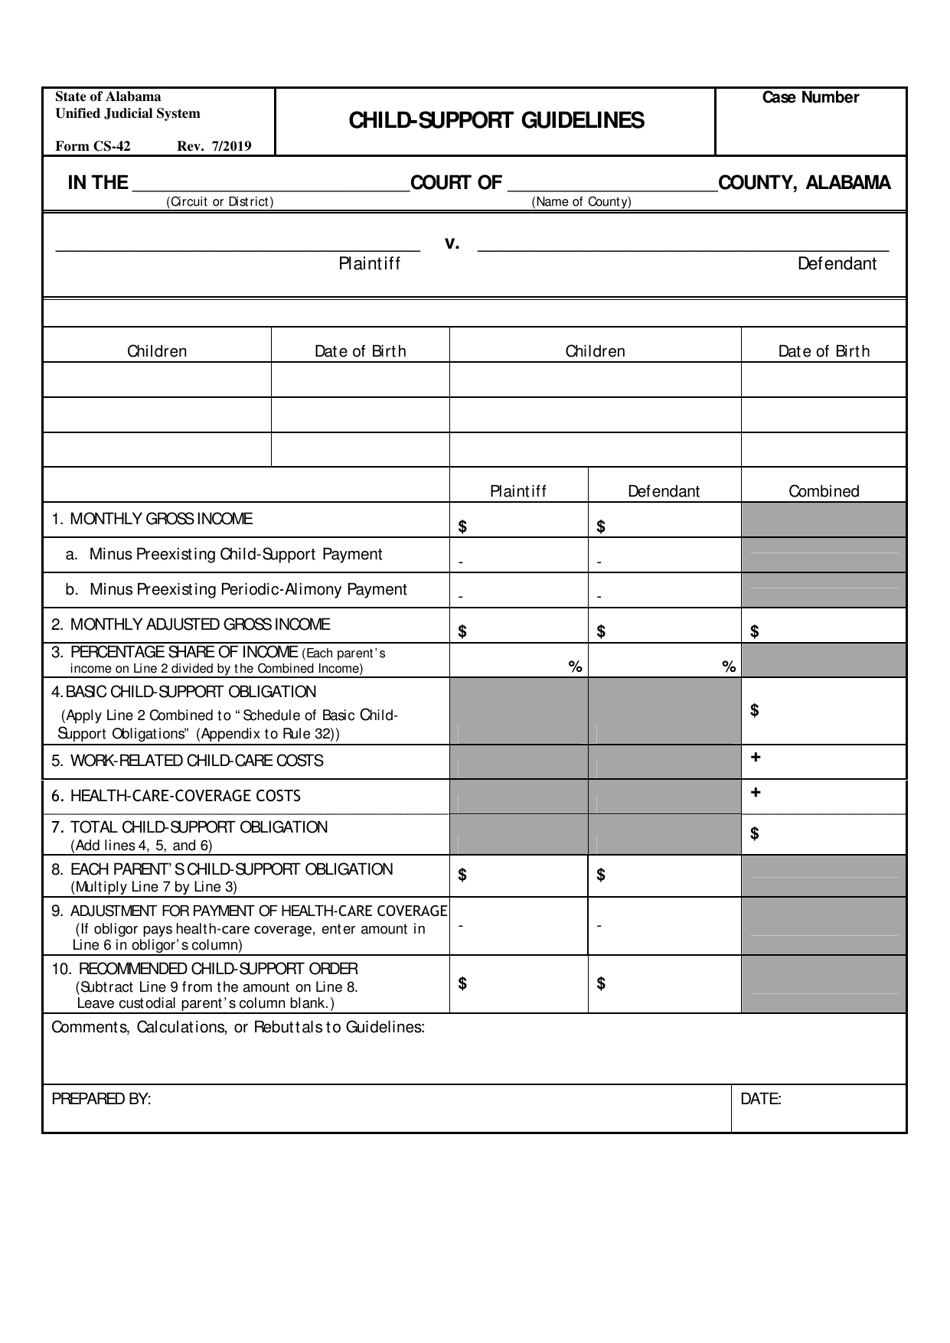 Form CS-42 Child-Support Guidelines - Alabama, Page 1